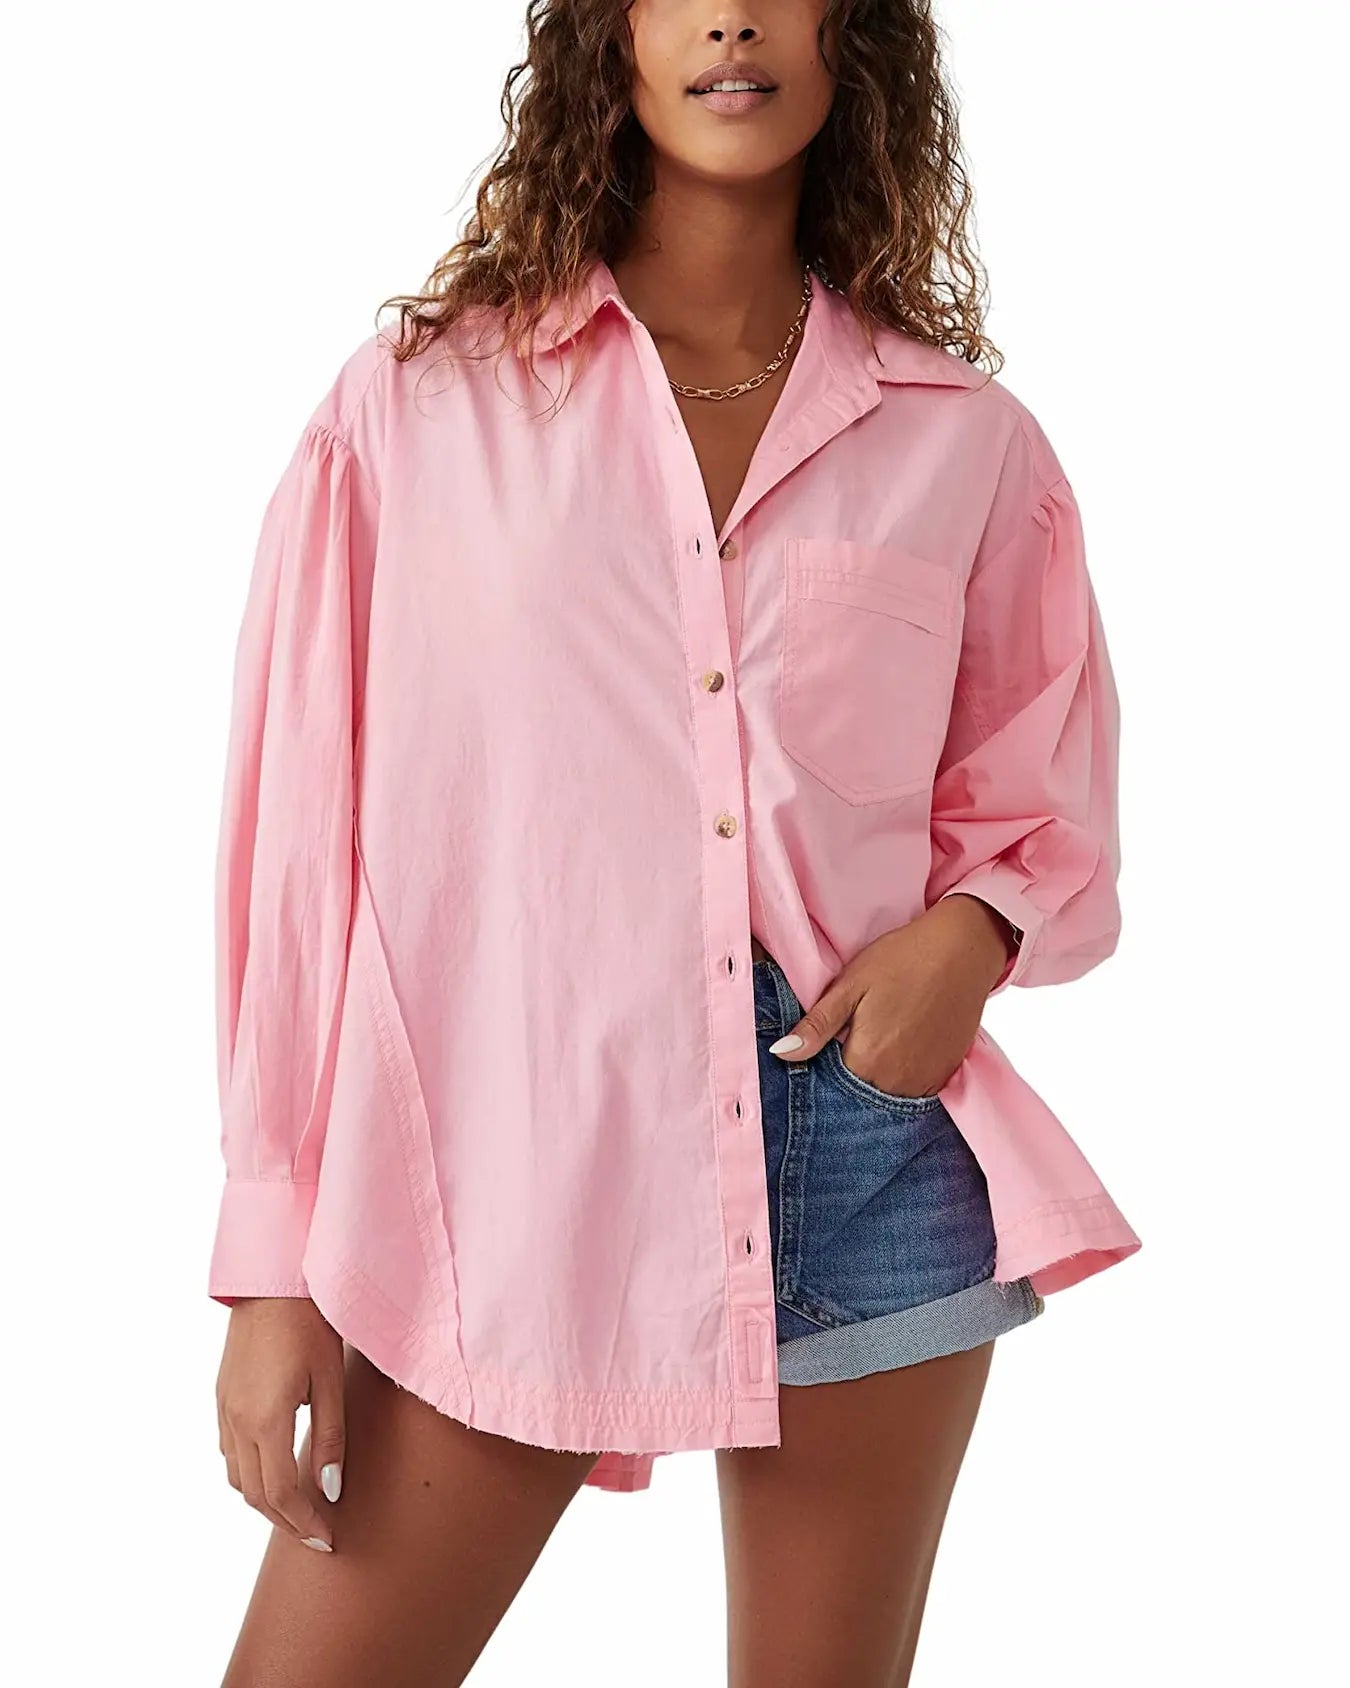 A "Happy Hour" long sleeve button up shirt for women. In the color Strawberry cream, from the brand, Free People.